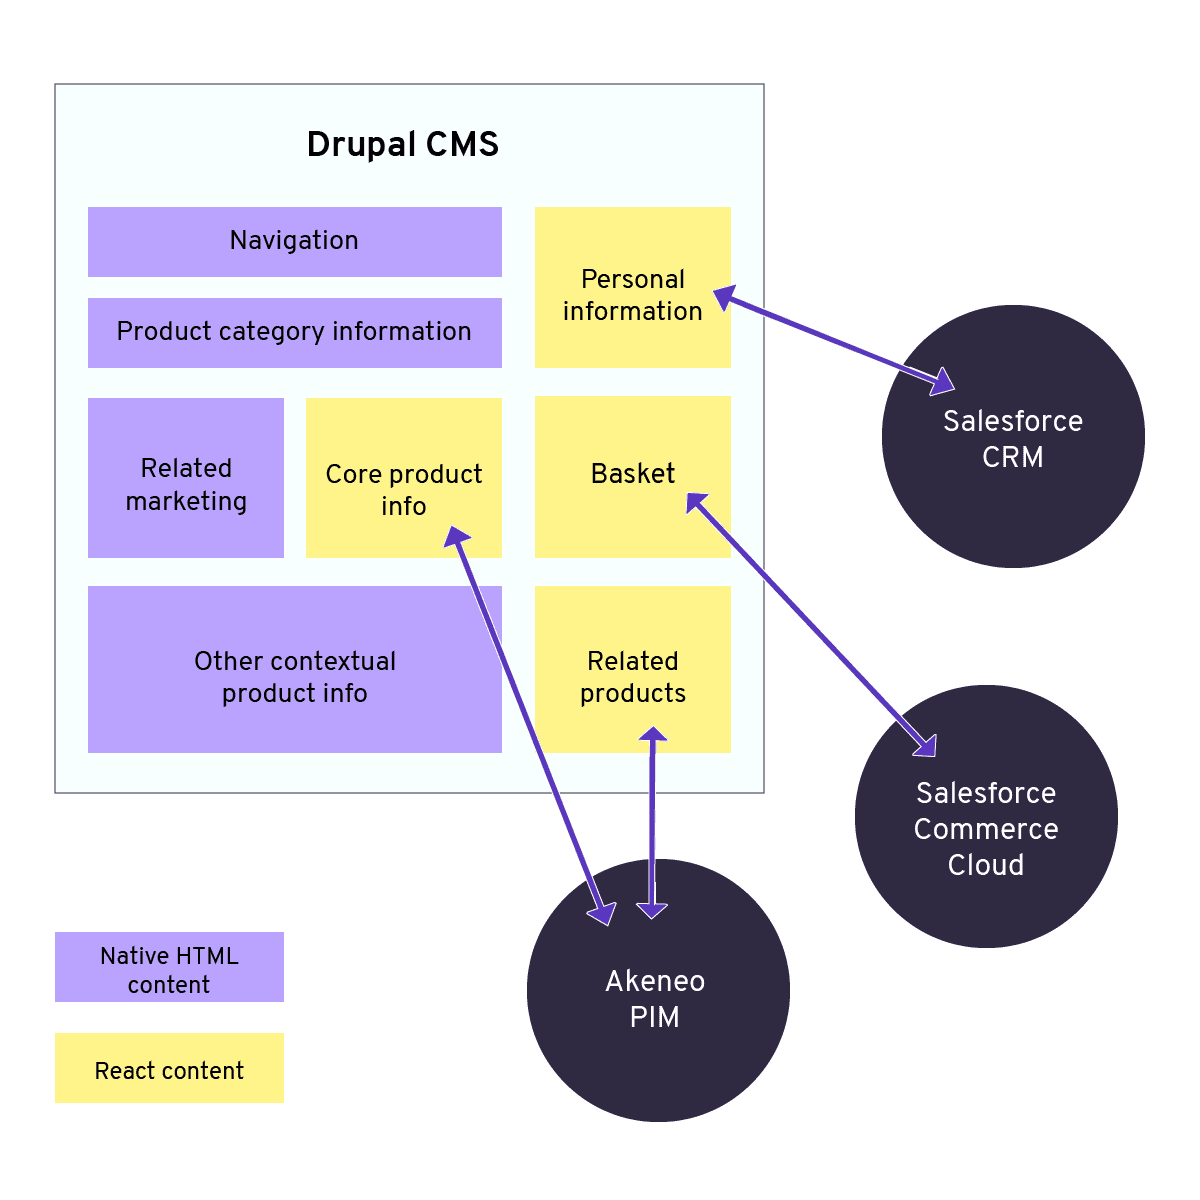 Drupal CMS and composable architecture example